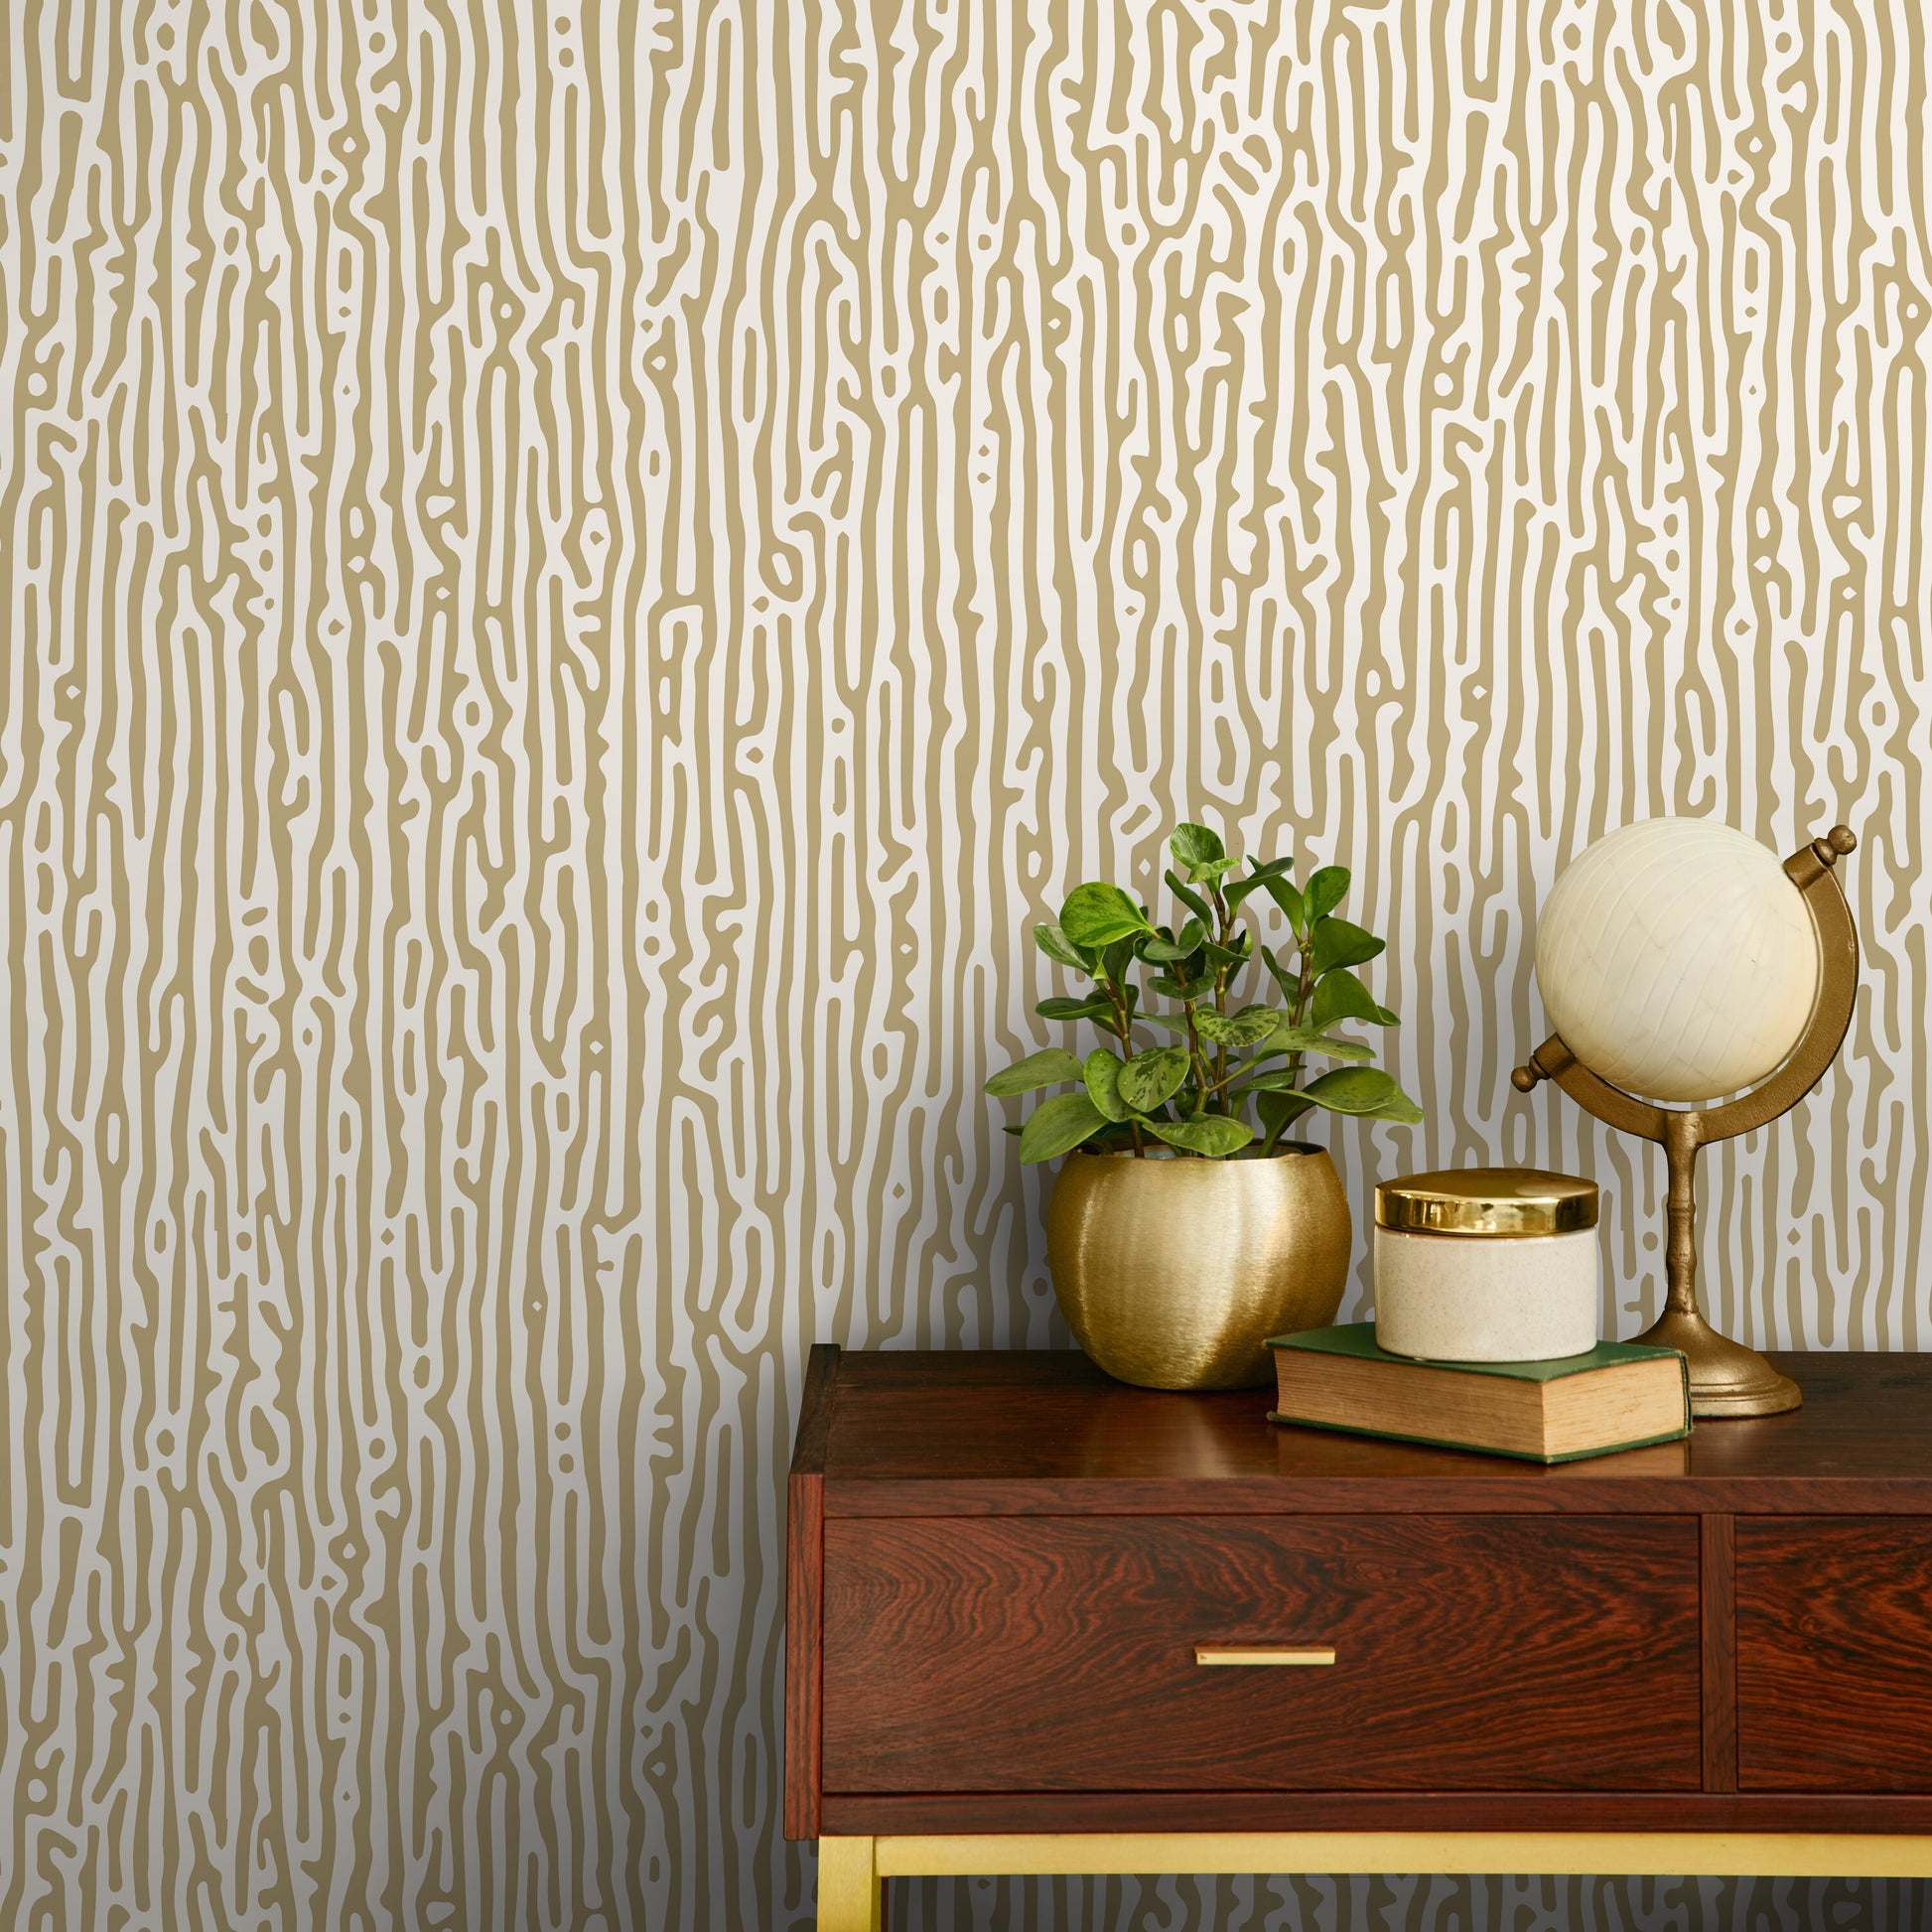 Beige Abstract Wallpaper Contemporary Art Wallpaper Peel and Stick and Traditional Wallpaper - D855